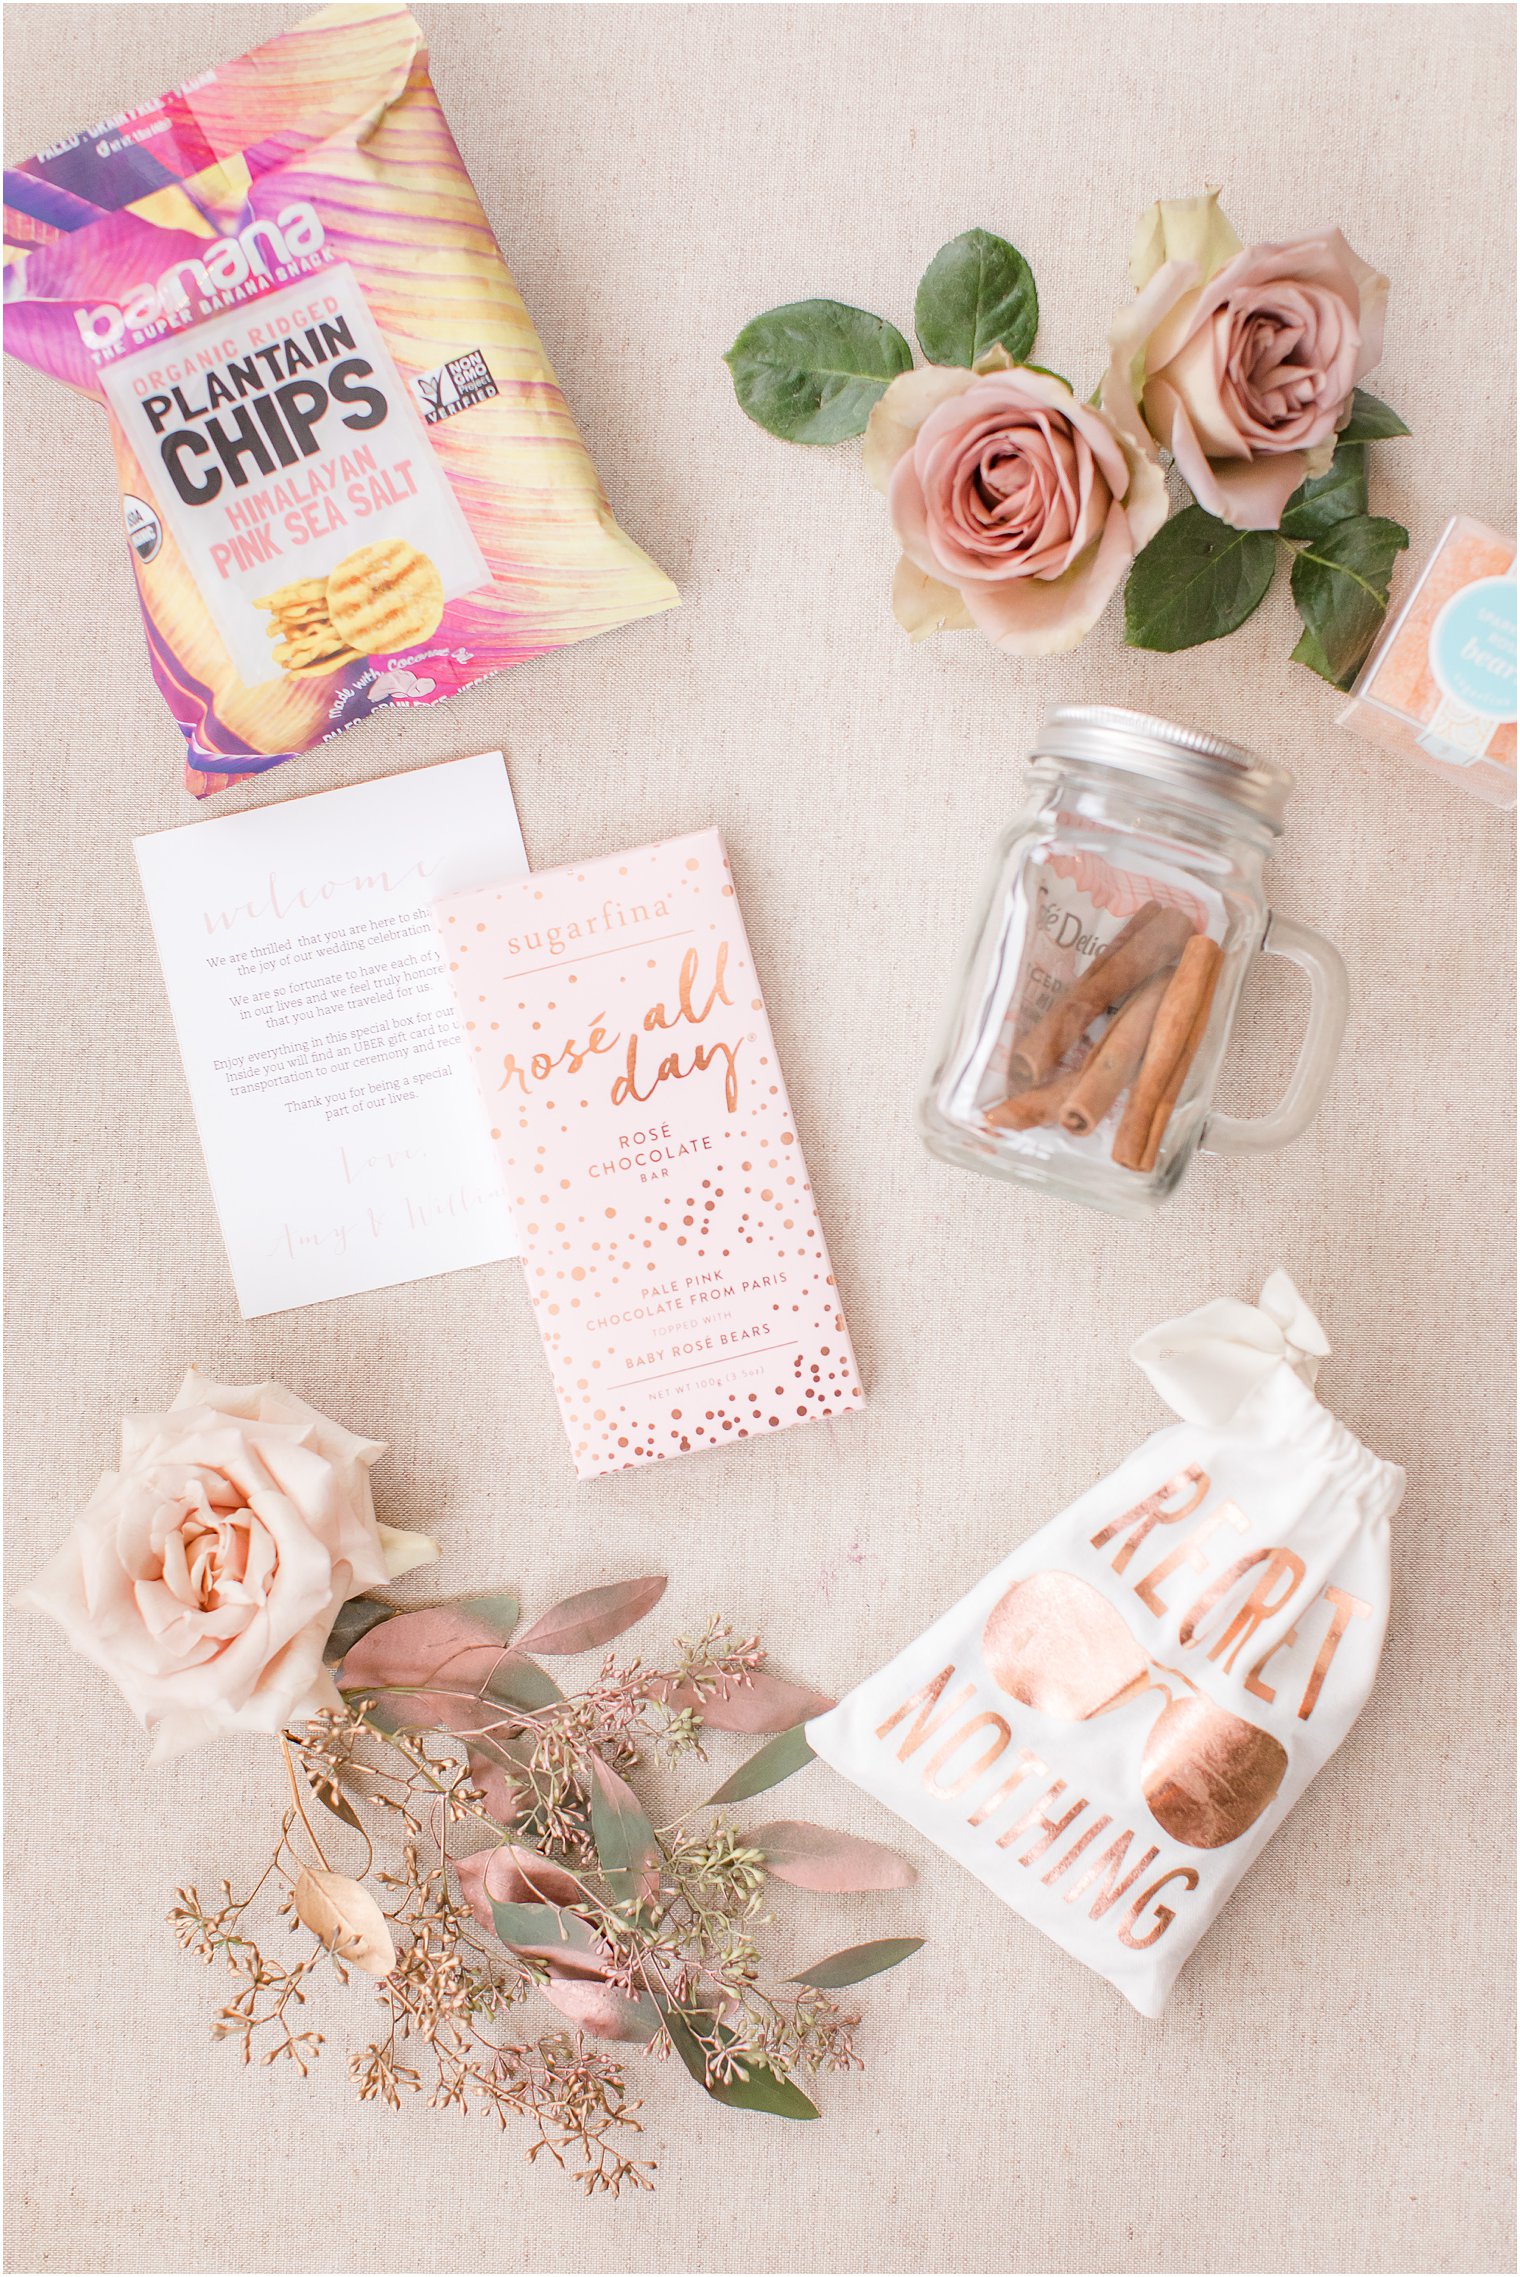 Things to Put in Your Wedding Welcome Bags, HGTV Top Picks